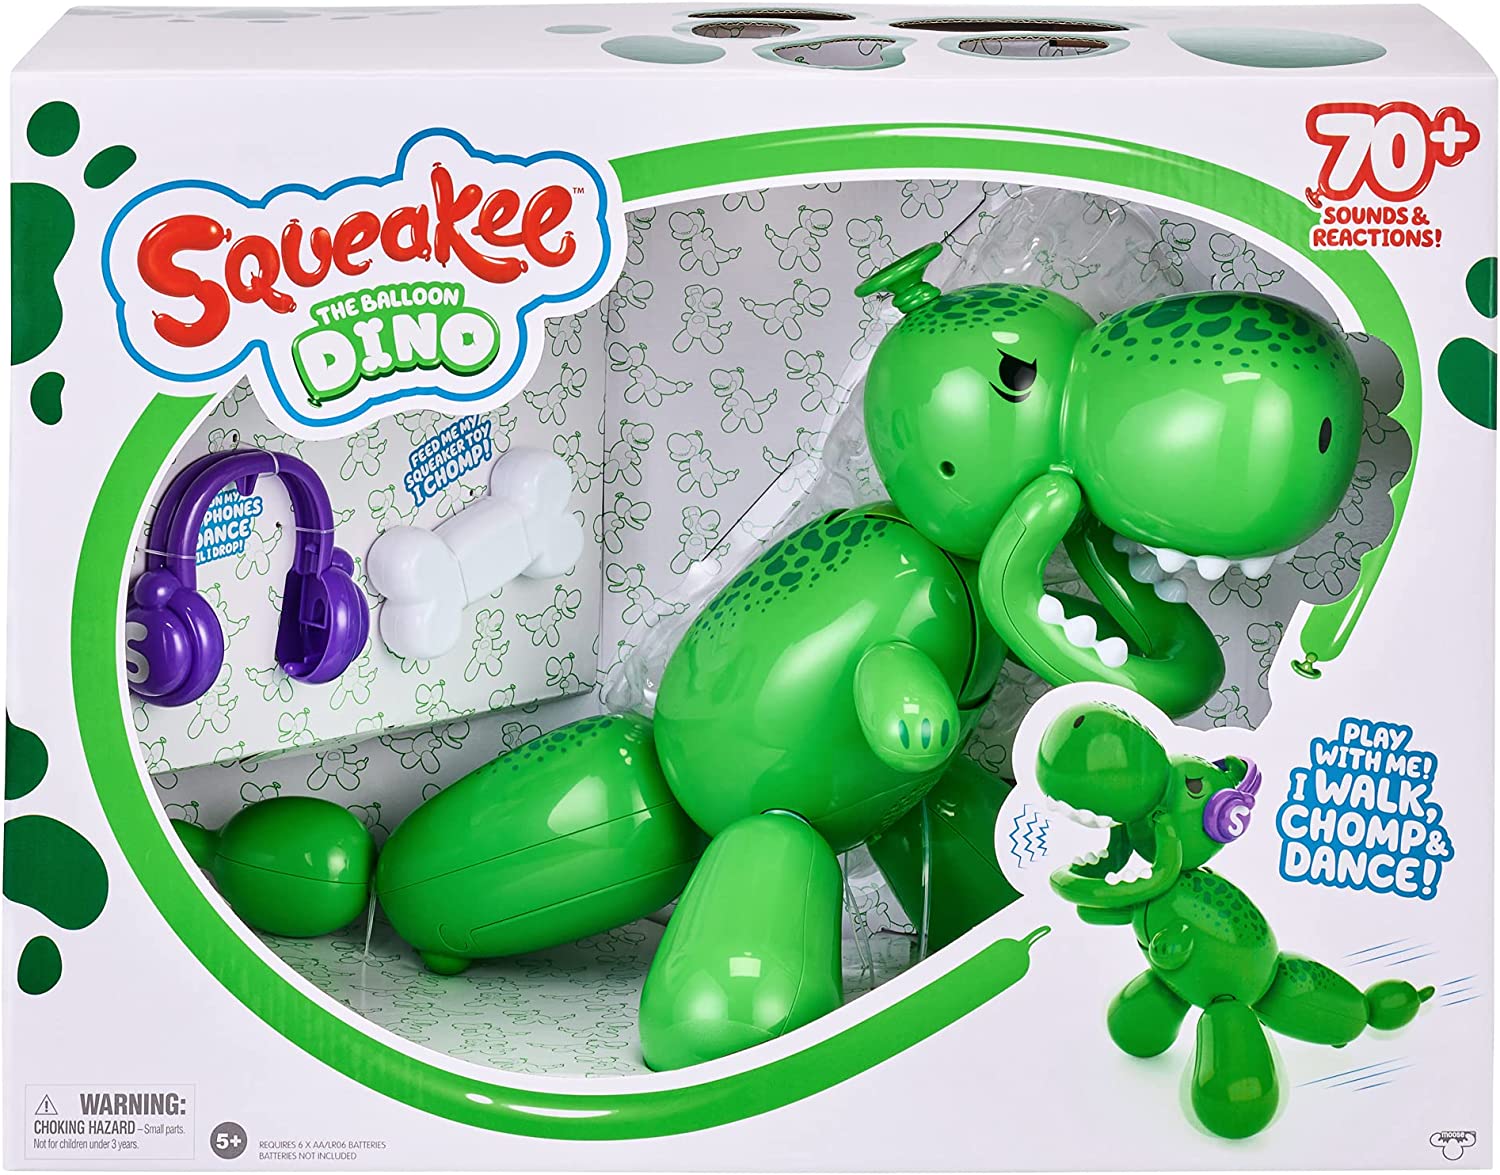 Squeakee The Balloon Dino Interactive Dinosaur Pet Toy w/ 70+ Sounds & Reactions $19.39 + Free Shipping w/ Prime